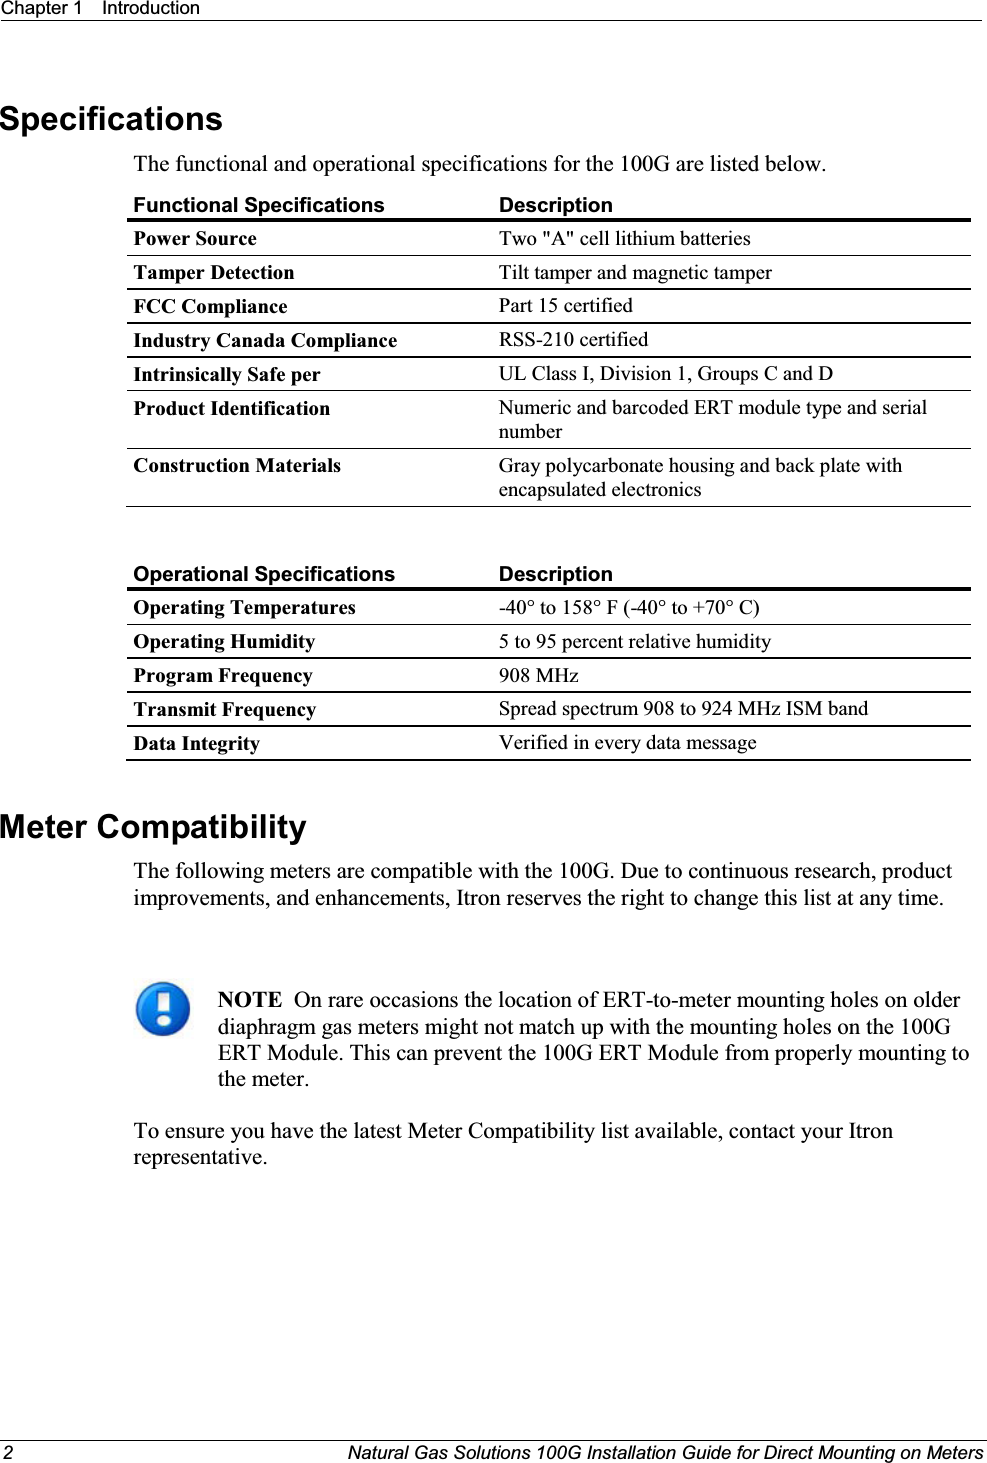 Chapter 1 Introduction2  Natural Gas Solutions 100G Installation Guide for Direct Mounting on MetersSpecifications The functional and operational specifications for the 100G are listed below.  Functional Specifications DescriptionPower Source Two &quot;A&quot; cell lithium batteriesTamper Detection Tilt tamper and magnetic tamperFCC Compliance Part 15 certifiedIndustry Canada Compliance RSS-210 certifiedIntrinsically Safe per UL Class I, Division 1, Groups C and DProduct Identification Numeric and barcoded ERT module type and serial numberConstruction Materials Gray polycarbonate housing and back plate with encapsulated electronicsOperational SpecificationsDescriptionOperating Temperatures -40° to 158° F (-40° to +70° C)Operating Humidity 5 to 95 percent relative humidityProgram Frequency 908 MHzTransmit Frequency Spread spectrum 908 to 924 MHz ISM bandData Integrity Verified in every data messageMeter Compatibility The following meters are compatible with the 100G. Due to continuous research, product improvements, and enhancements, Itron reserves the right to change this list at any time.NOTE  On rare occasions the location of ERT-to-meter mounting holes on older diaphragm gas meters might not match up with the mounting holes on the 100G ERT Module. This can prevent the 100G ERT Module from properly mounting to the meter.To ensure you have the latest Meter Compatibility list available, contact your Itron representative.